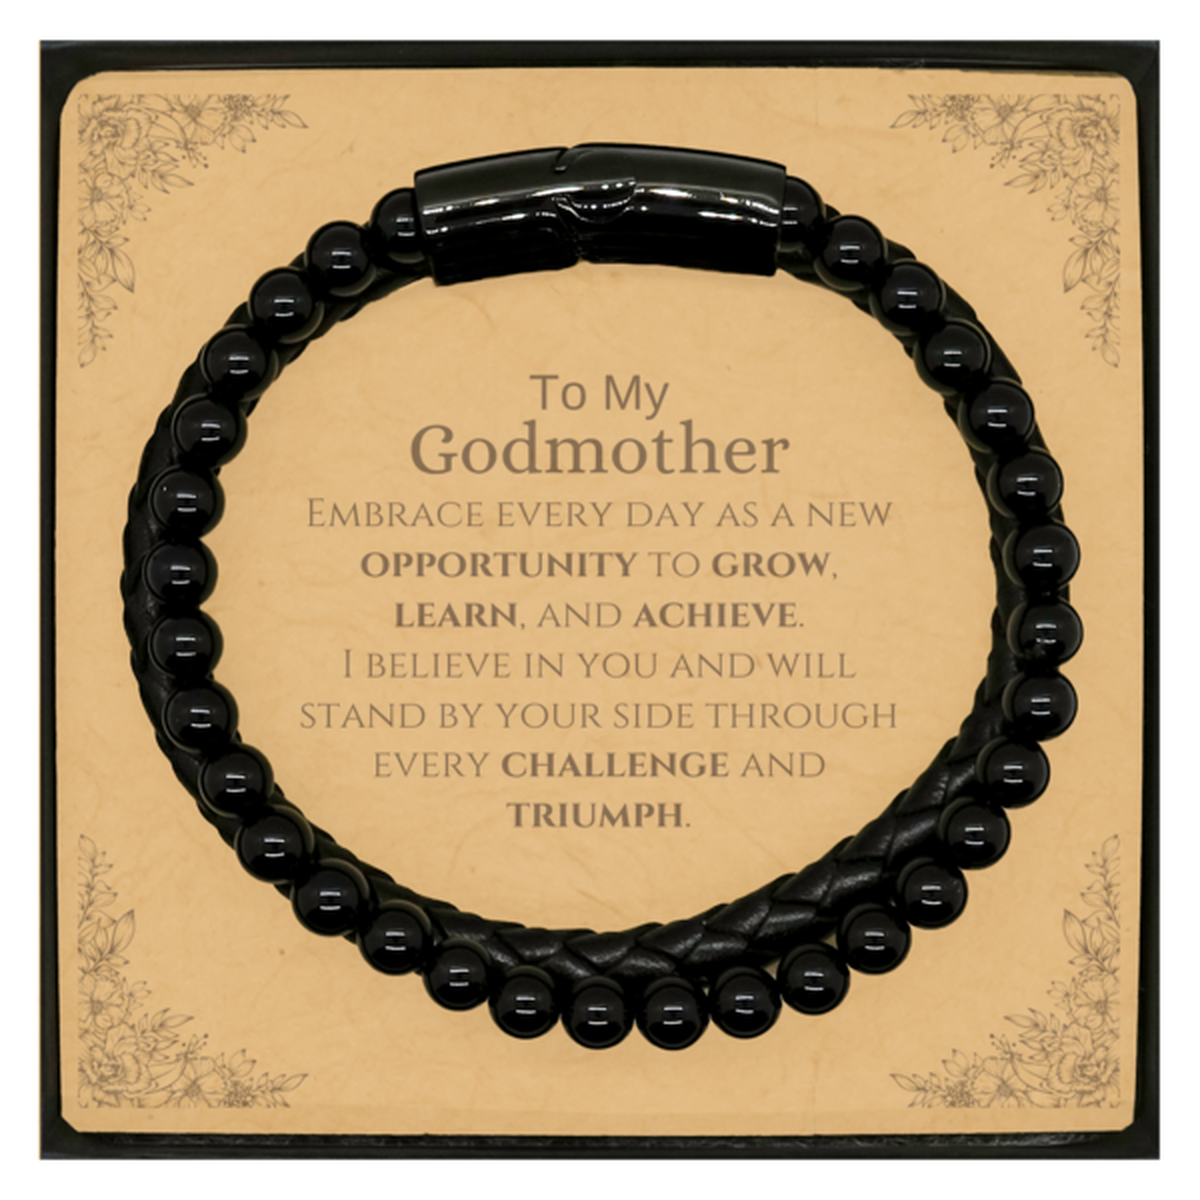 To My Godmother Gifts, I believe in you and will stand by your side, Inspirational Stone Leather Bracelets For Godmother, Birthday Christmas Motivational Godmother Gifts